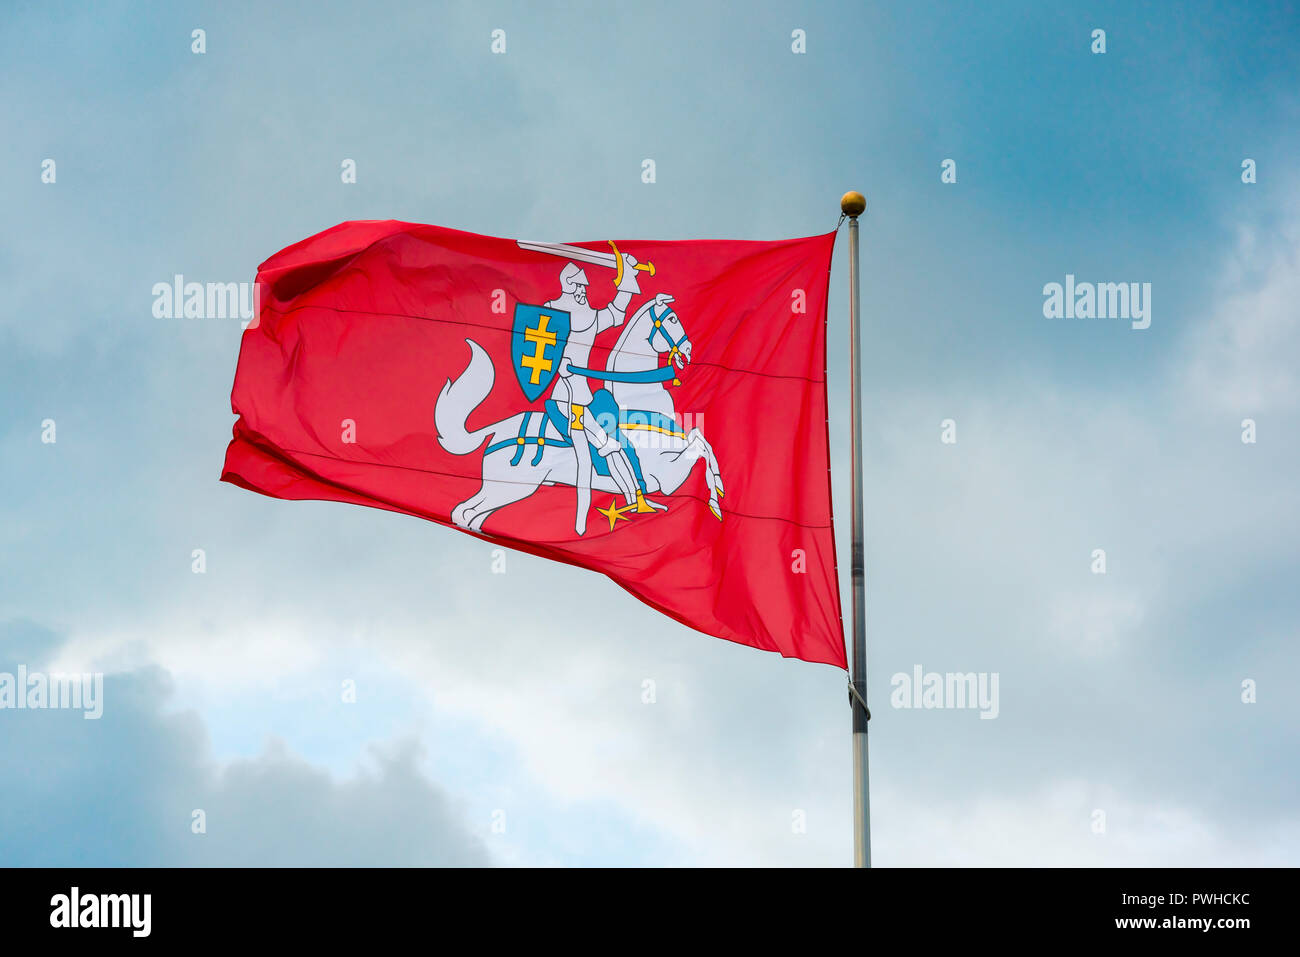 Lithuania flag, view of the Lithuanian state flag showing a white knight riding a white horse on a red background, Vilnius. Stock Photo